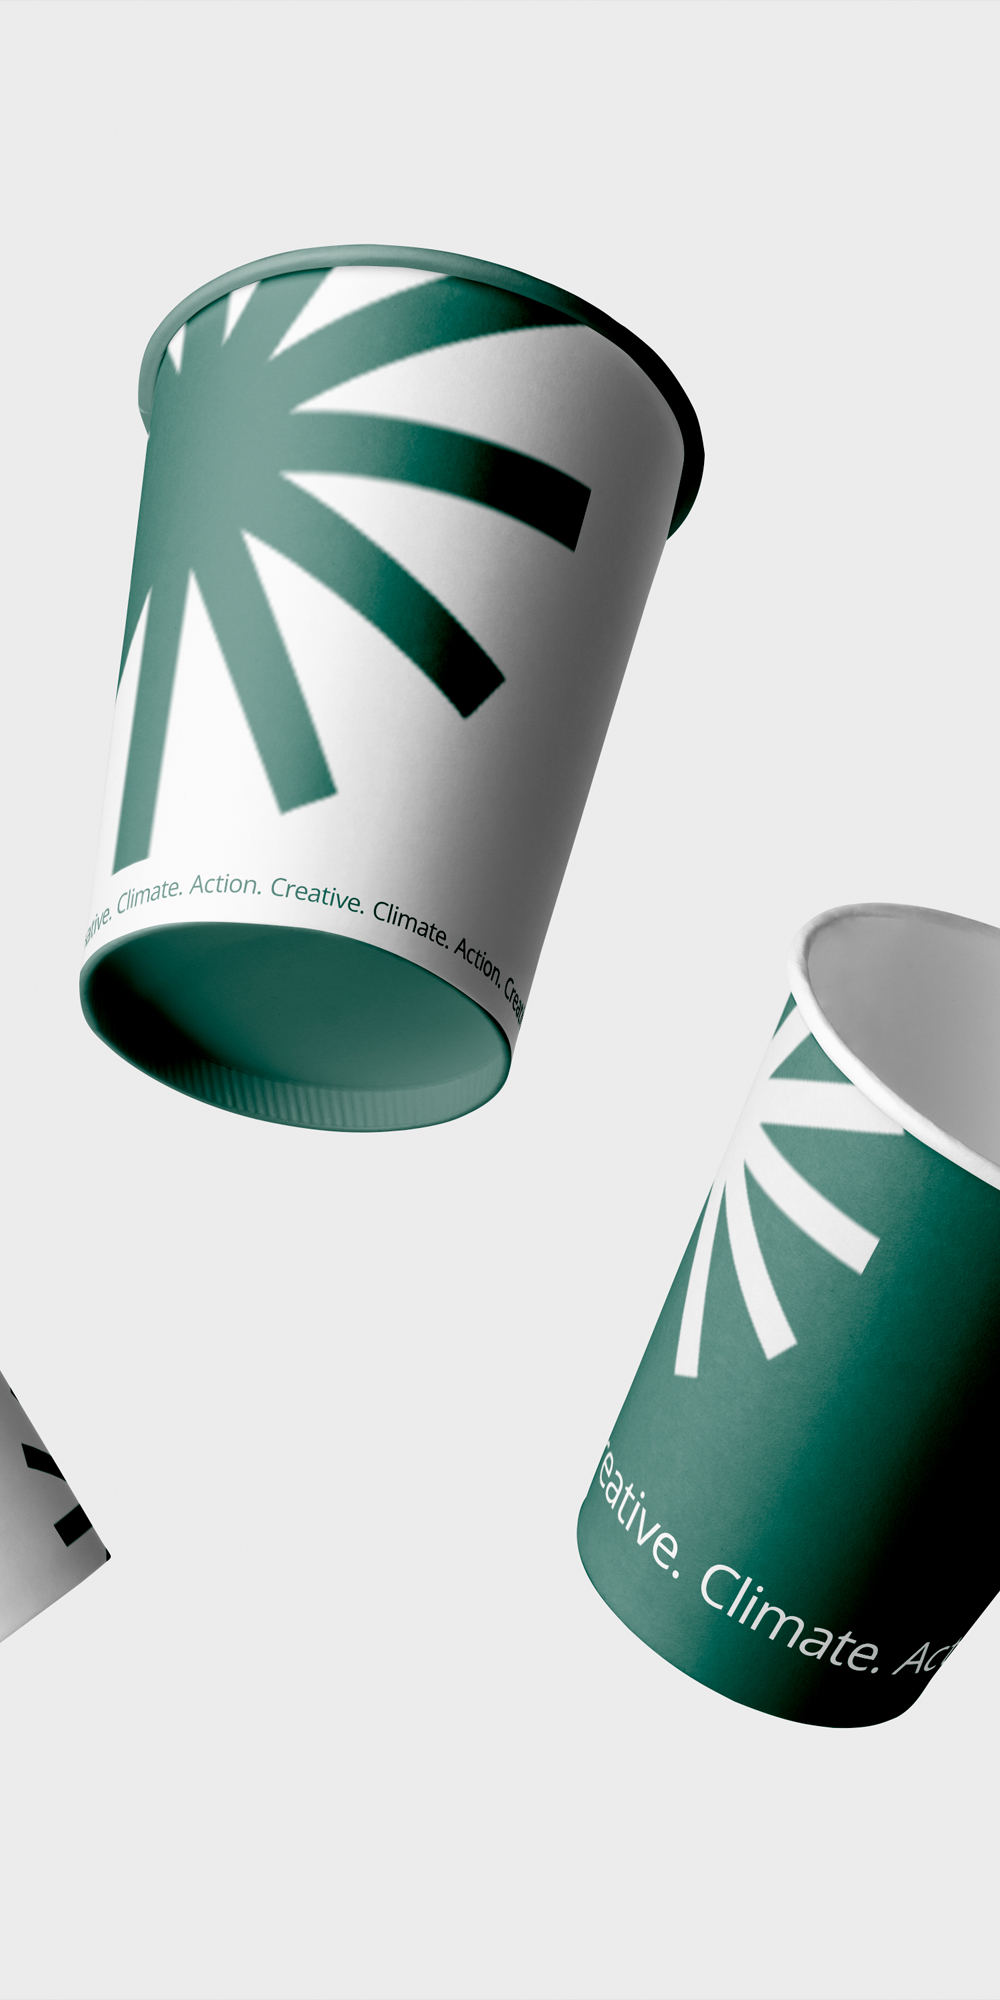 Two paper cups with the Creative Climate logo and branding